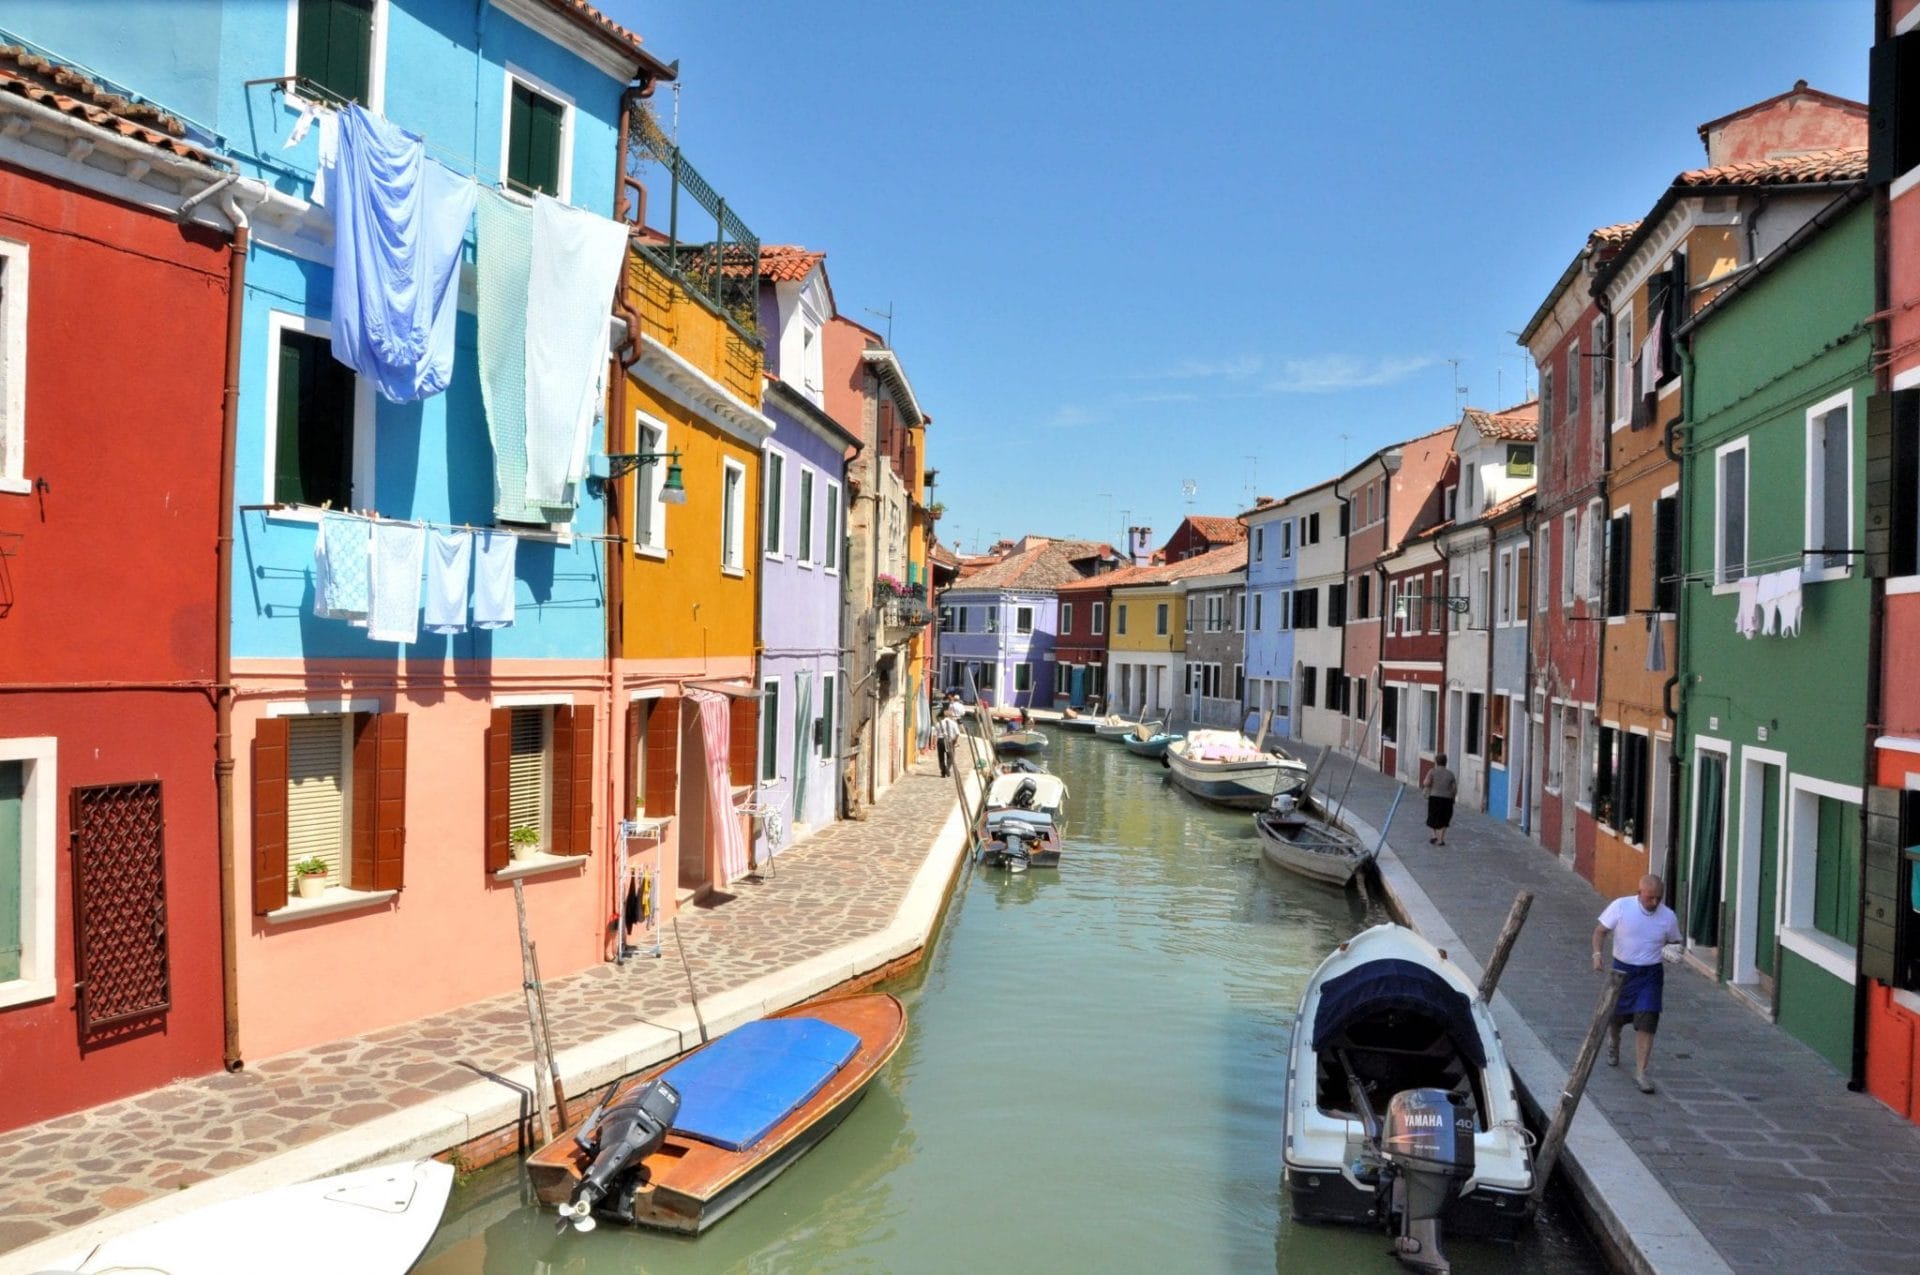 The main canal of Burano